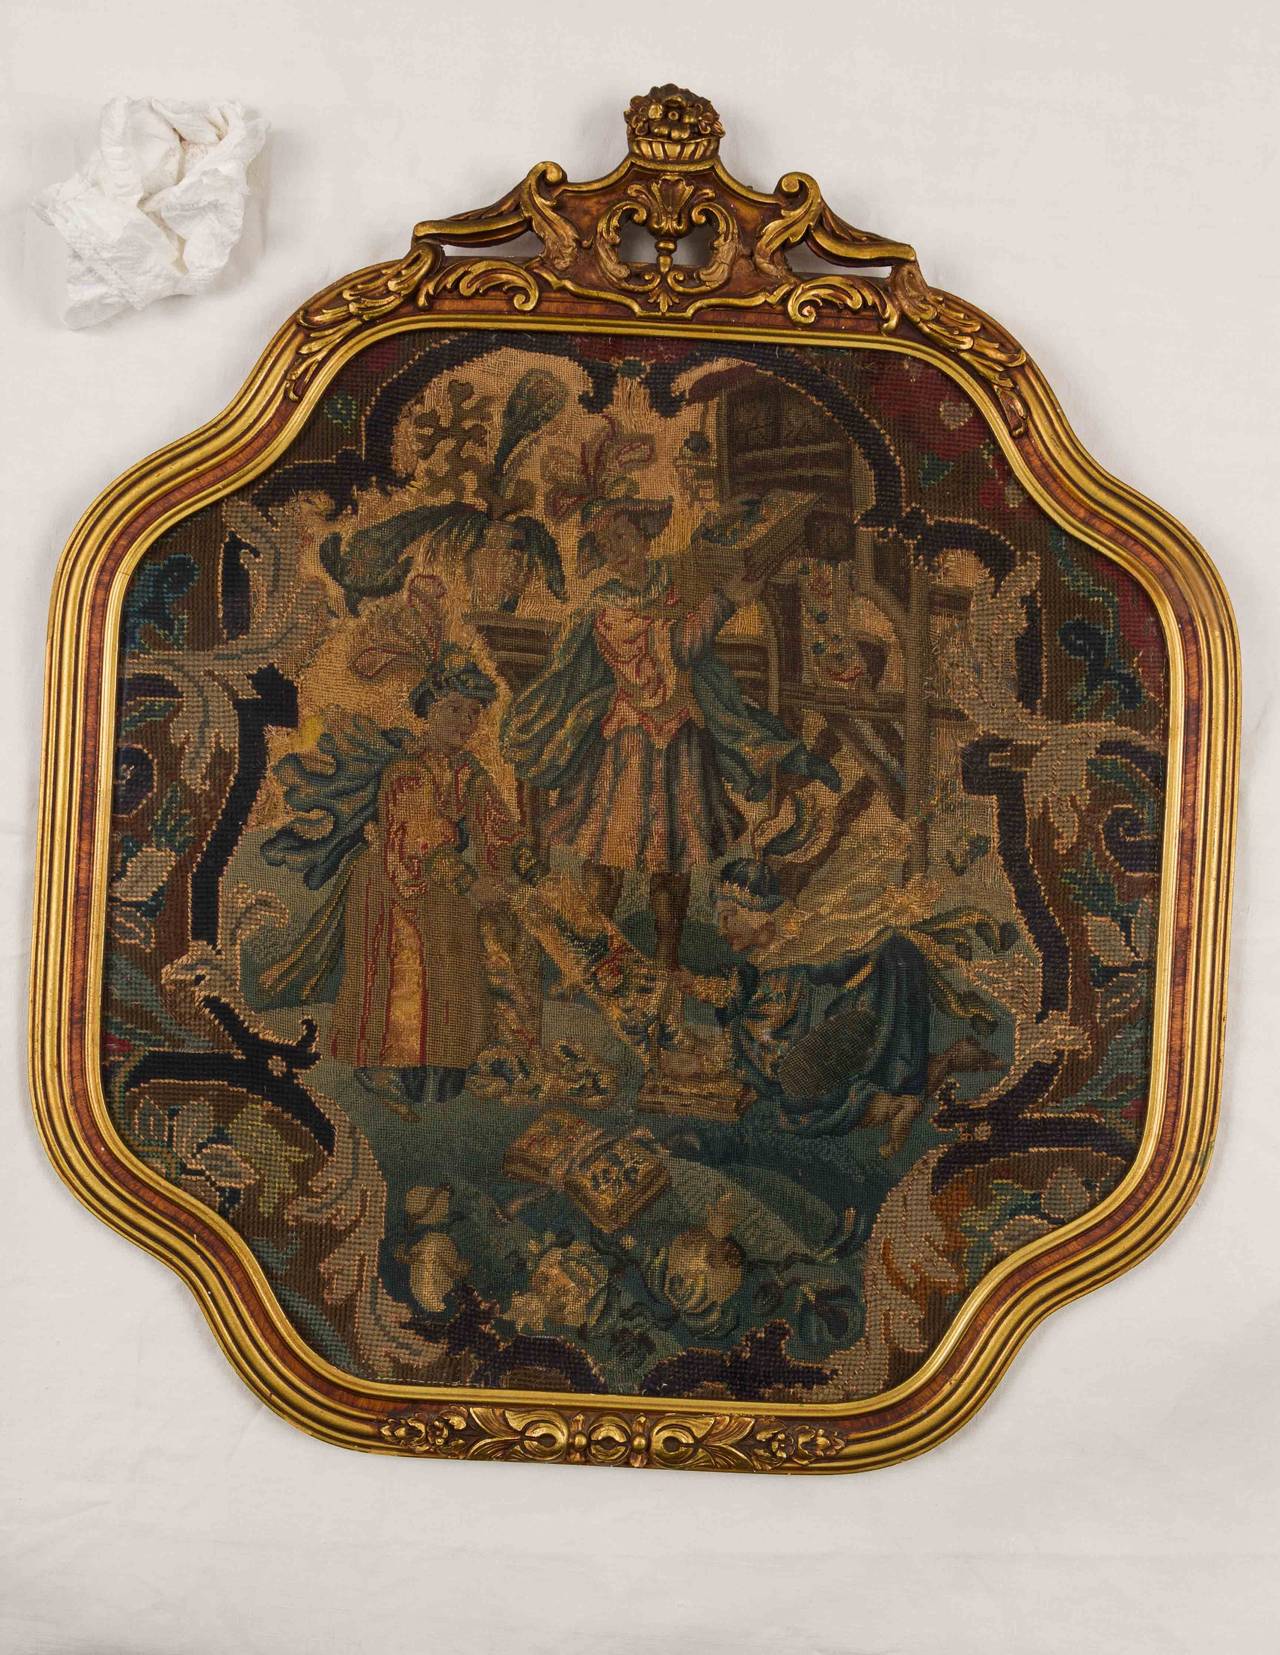 Early needlework figural tapestry, with a custom-made gold leaf frame.